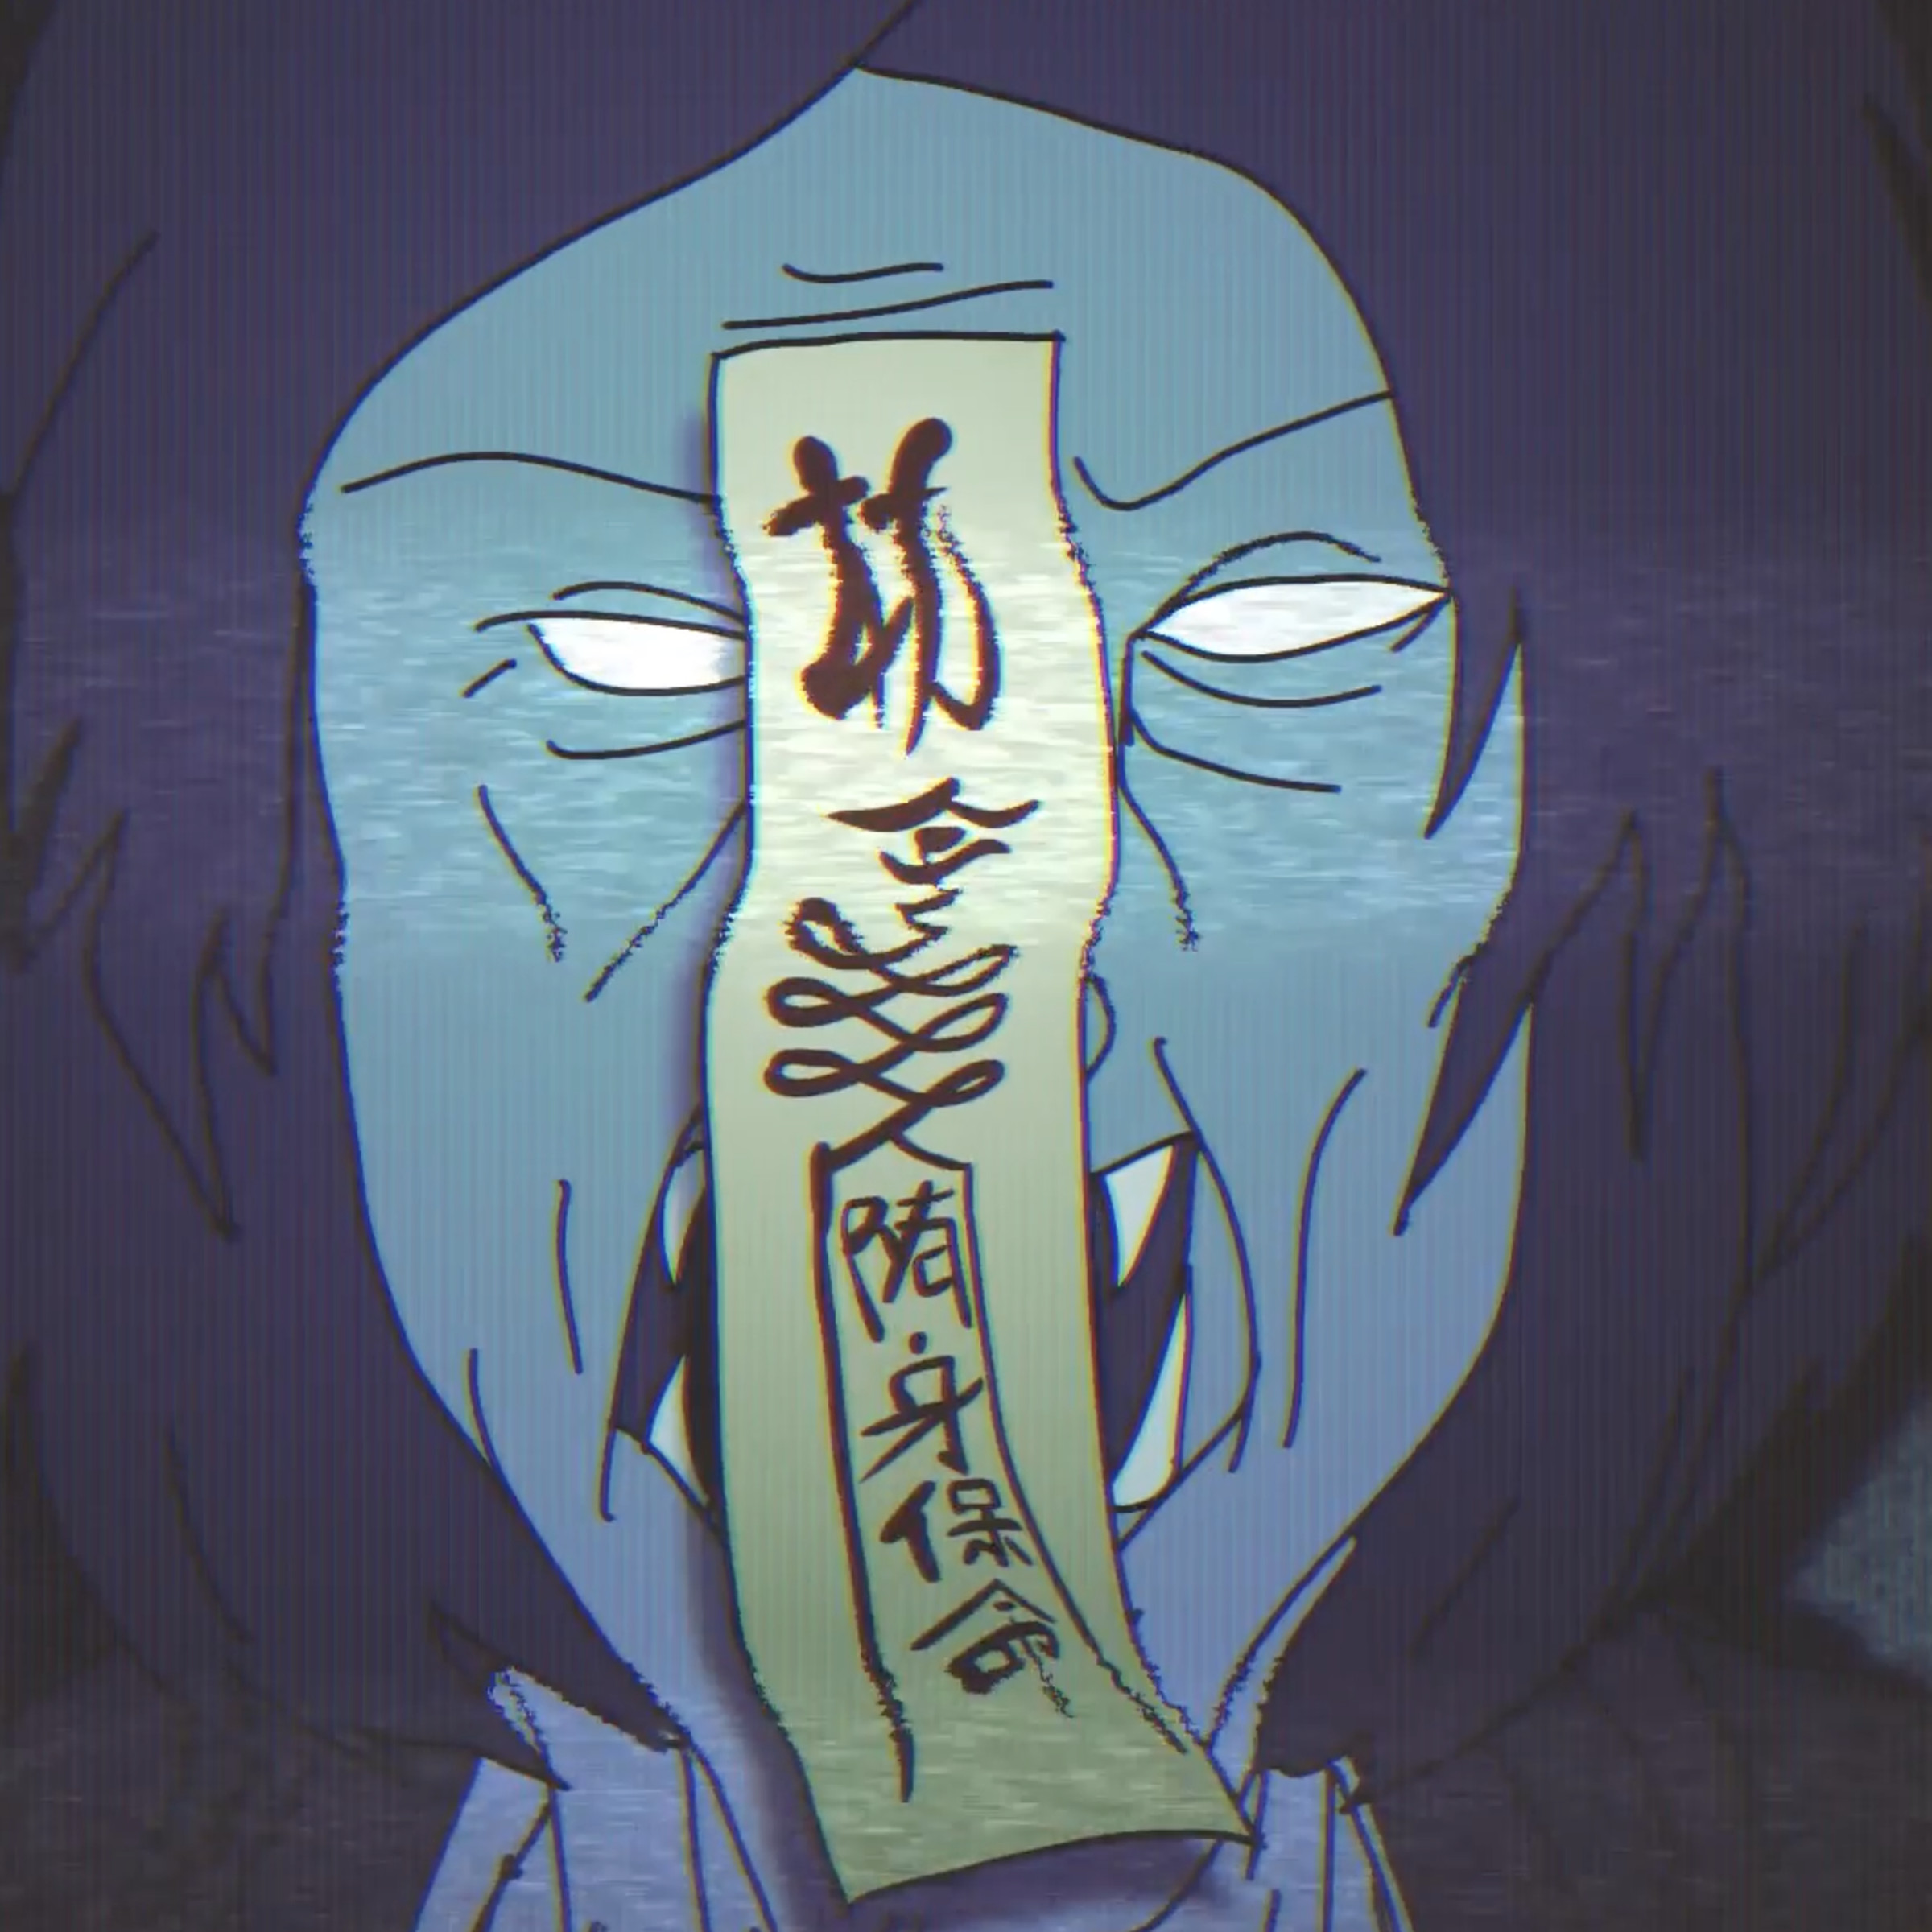 A tight shot of an undead man who has an ofuda attached to his forehead.